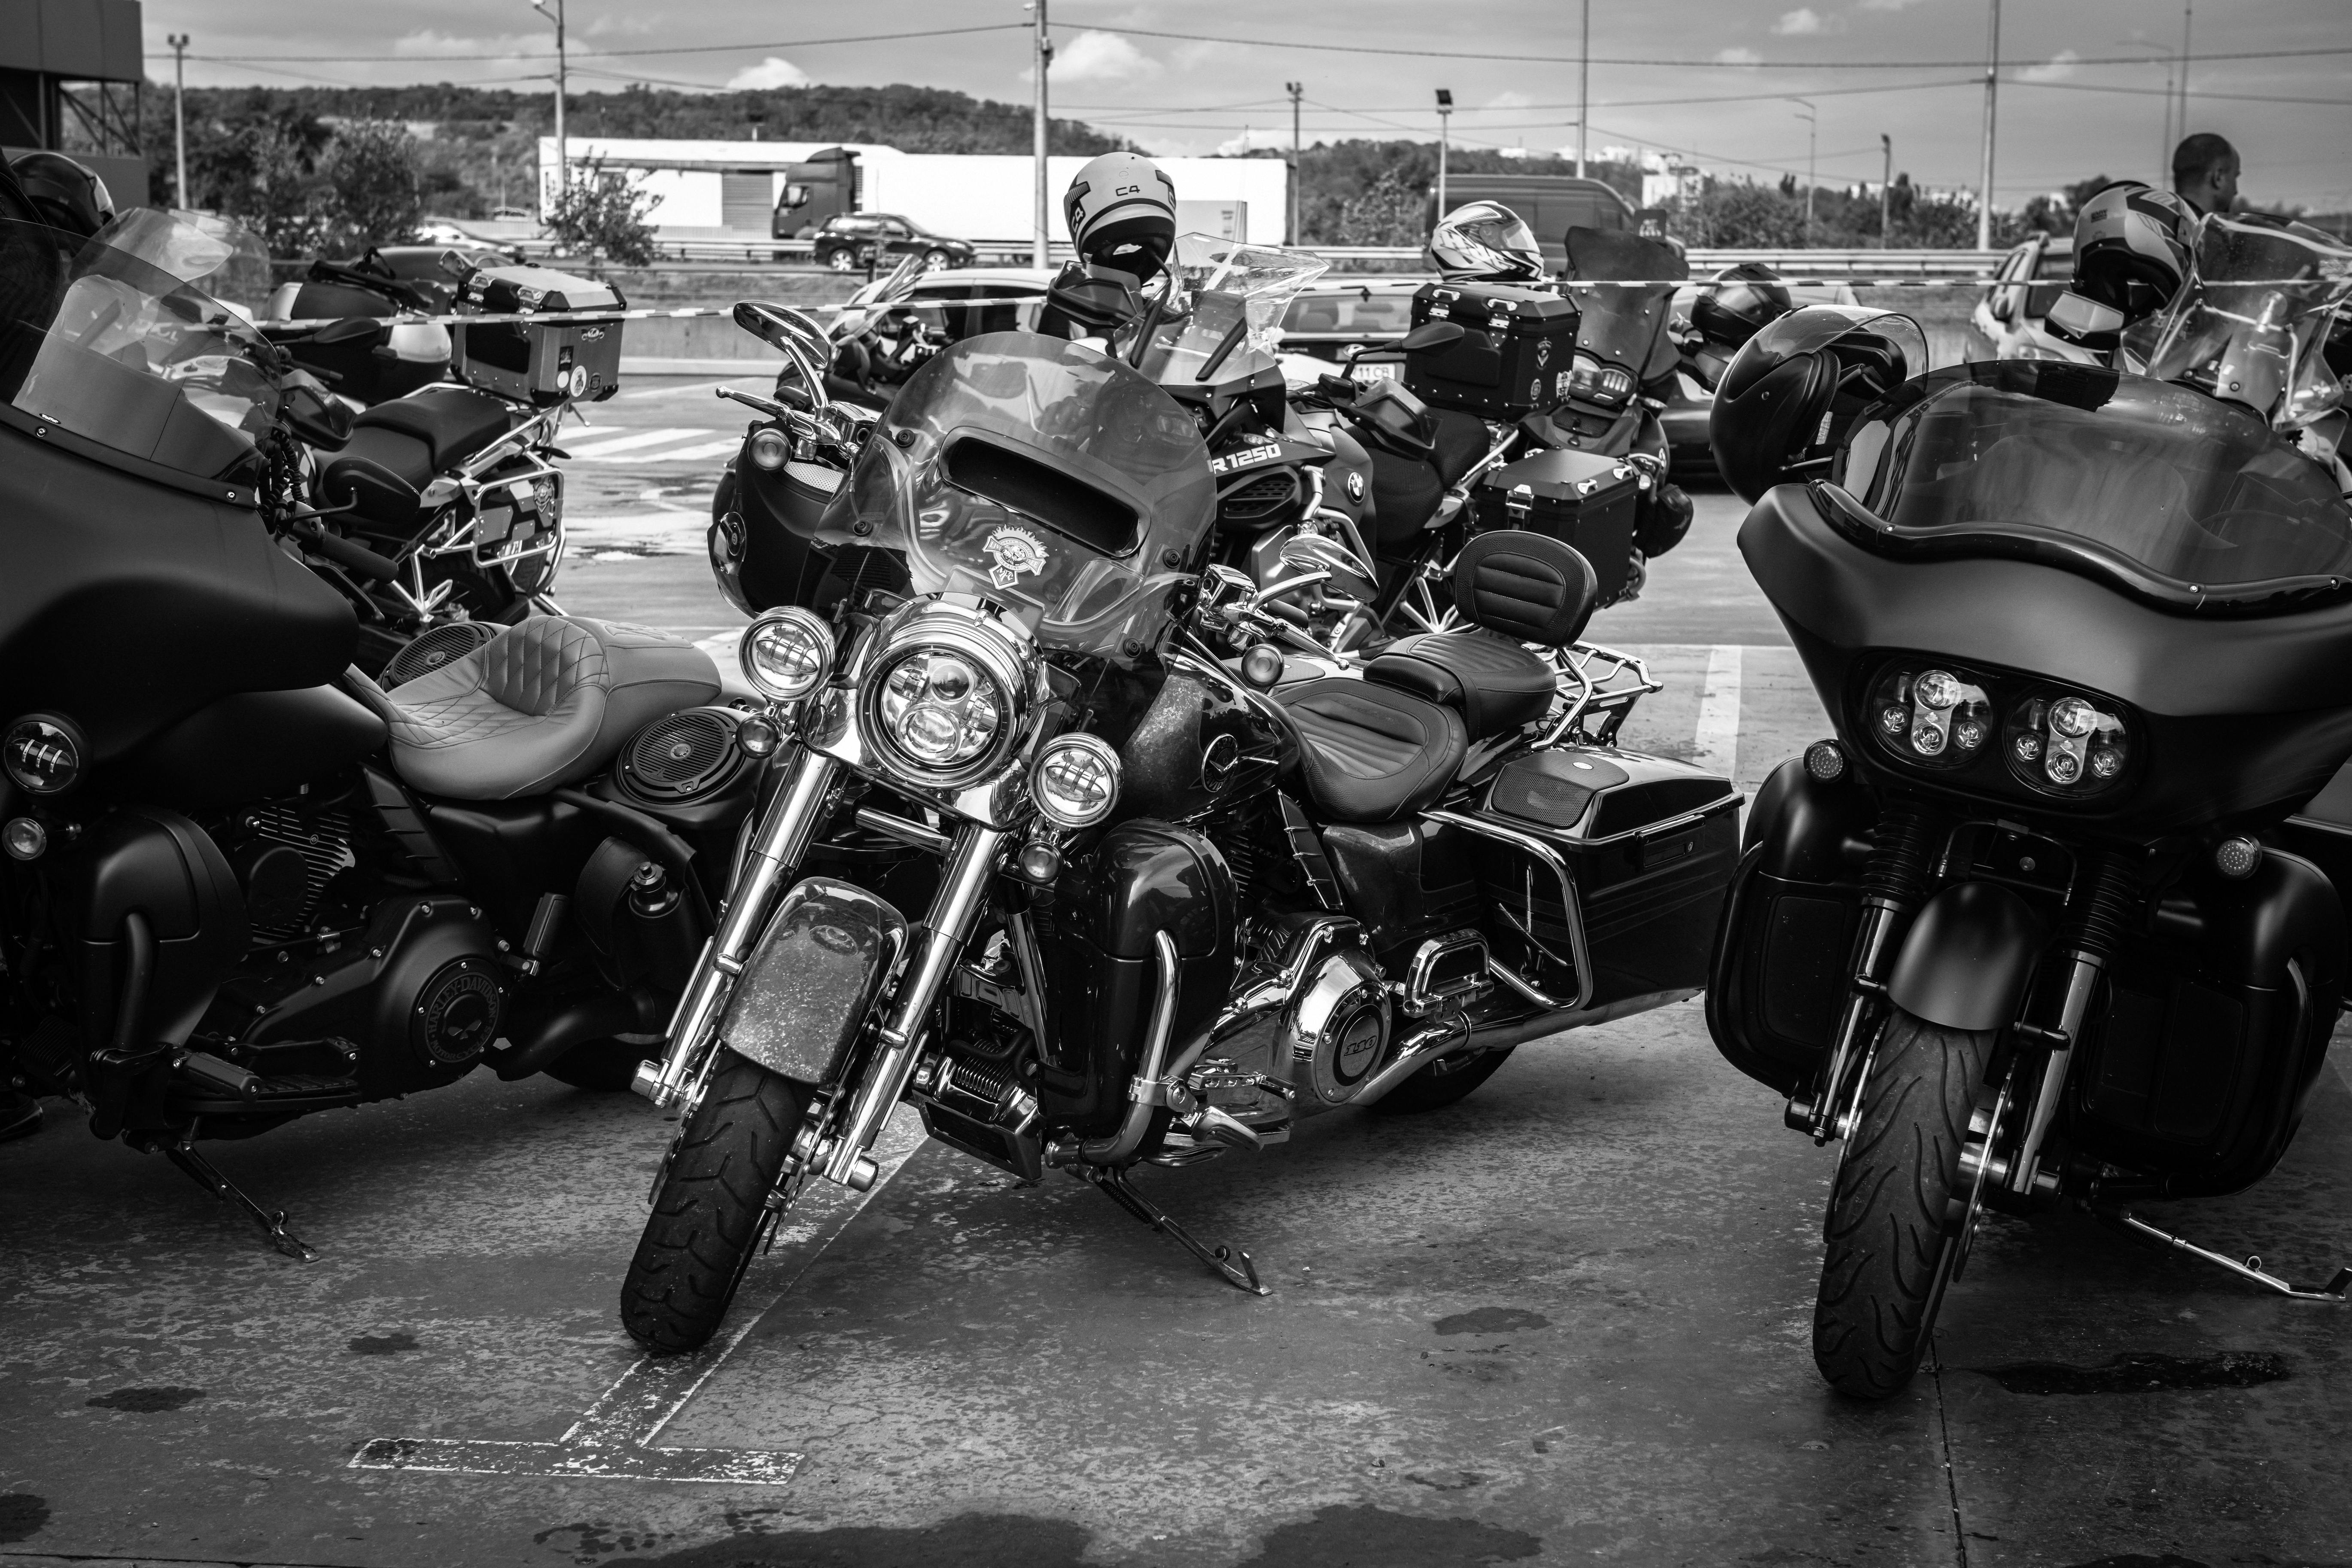 motorcycles lined up for motorcycle meetup in hawaii